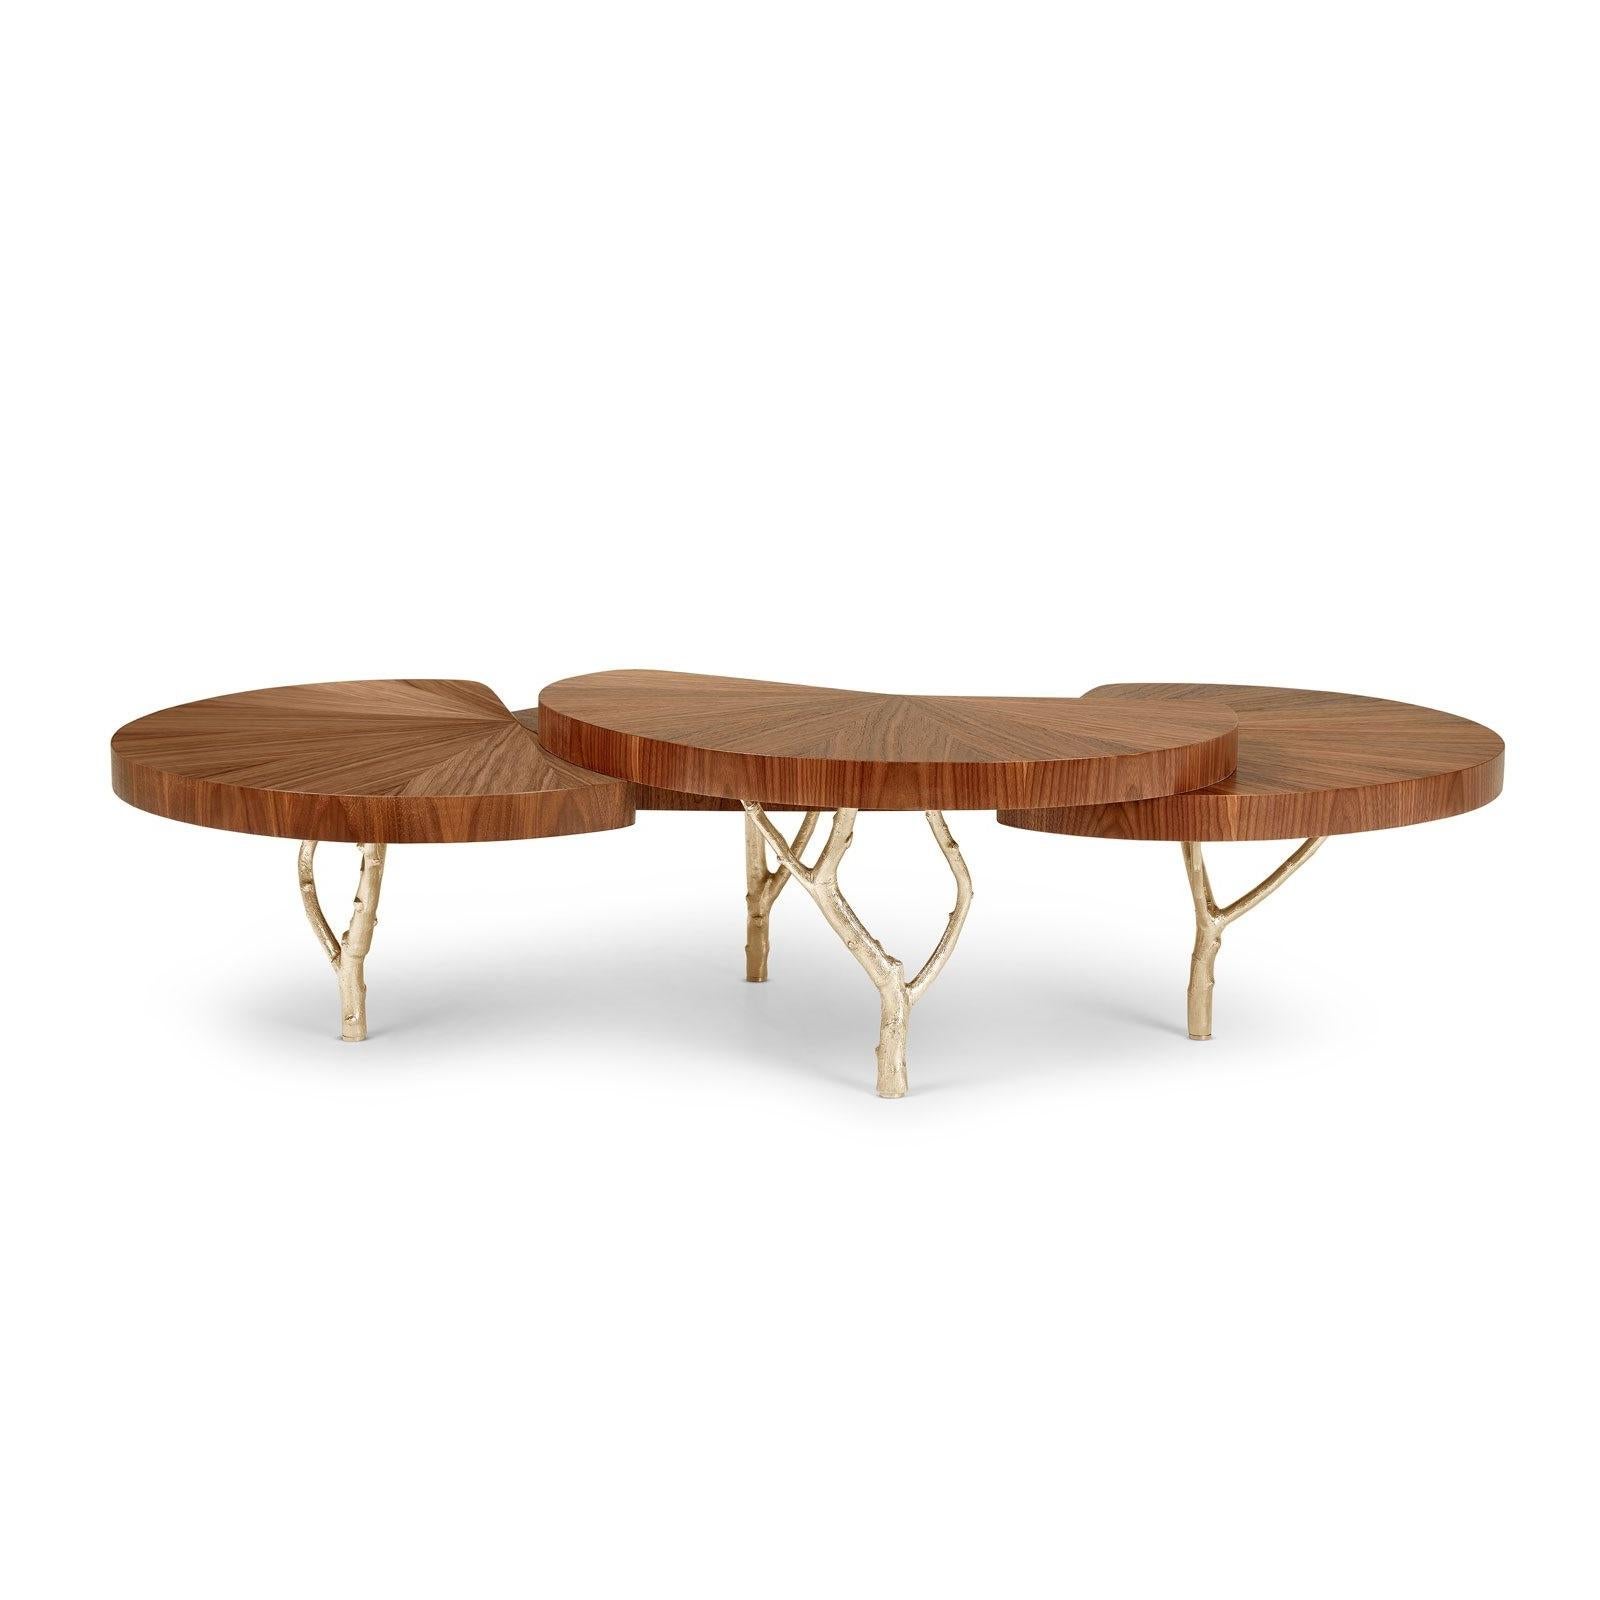 Springing from a low base made of fig tree branches in brass casting, this coffee table creates a dynamic presence from its layered tops and the handcrafted wood marquetry. A delicate balance for a living space.
Top: American Walnut.
Legs in cast